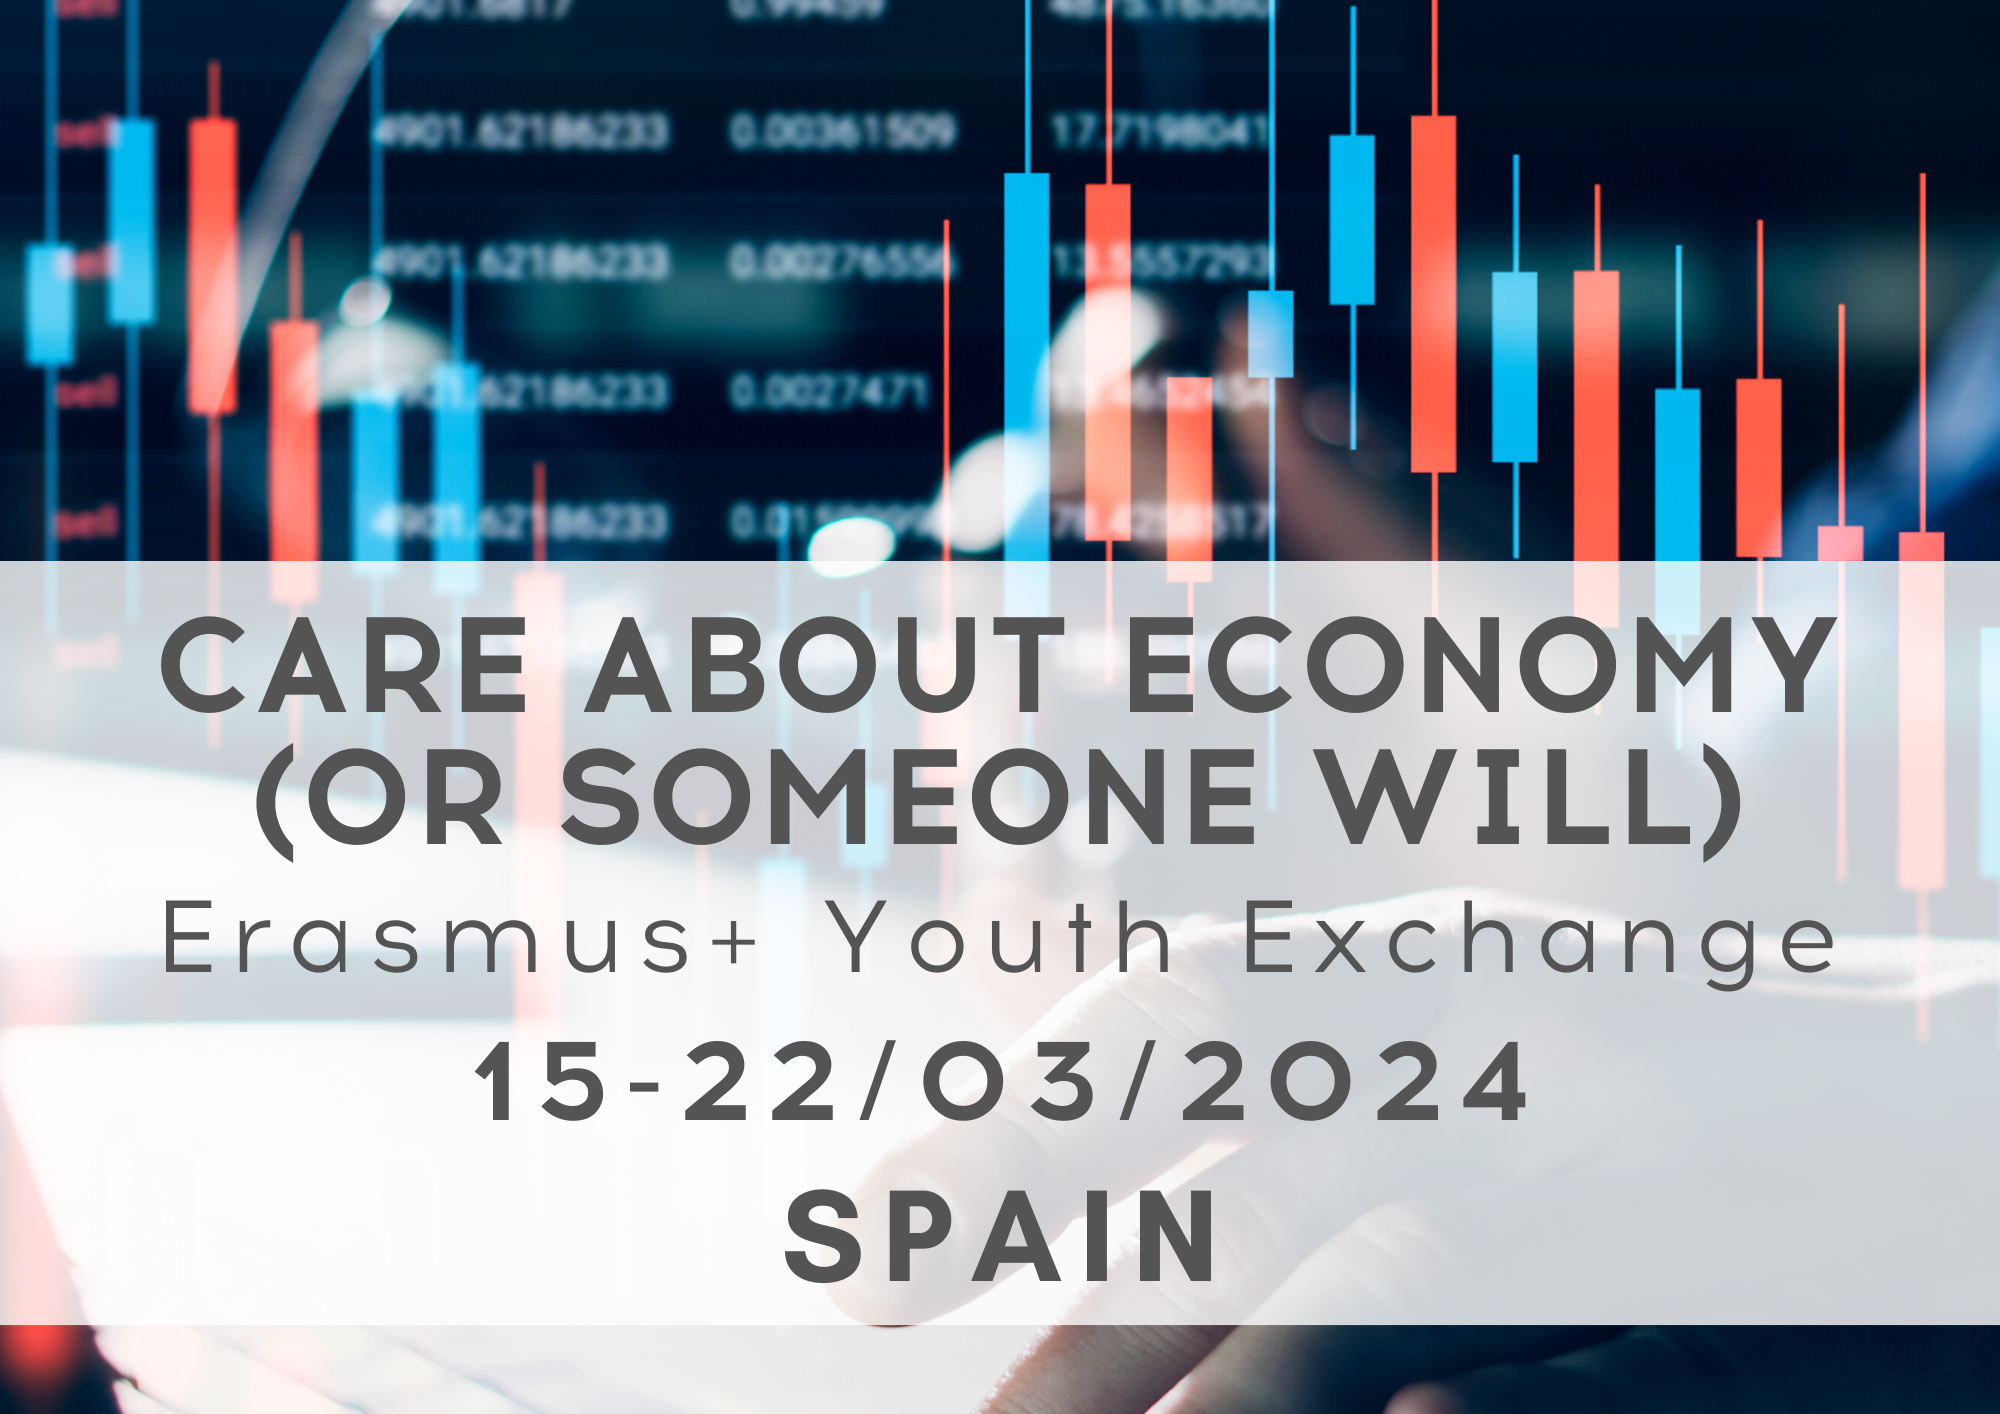 Erasmus+ Youth Exchange CARE ABOUT ECONOMY 15-22.03.2024